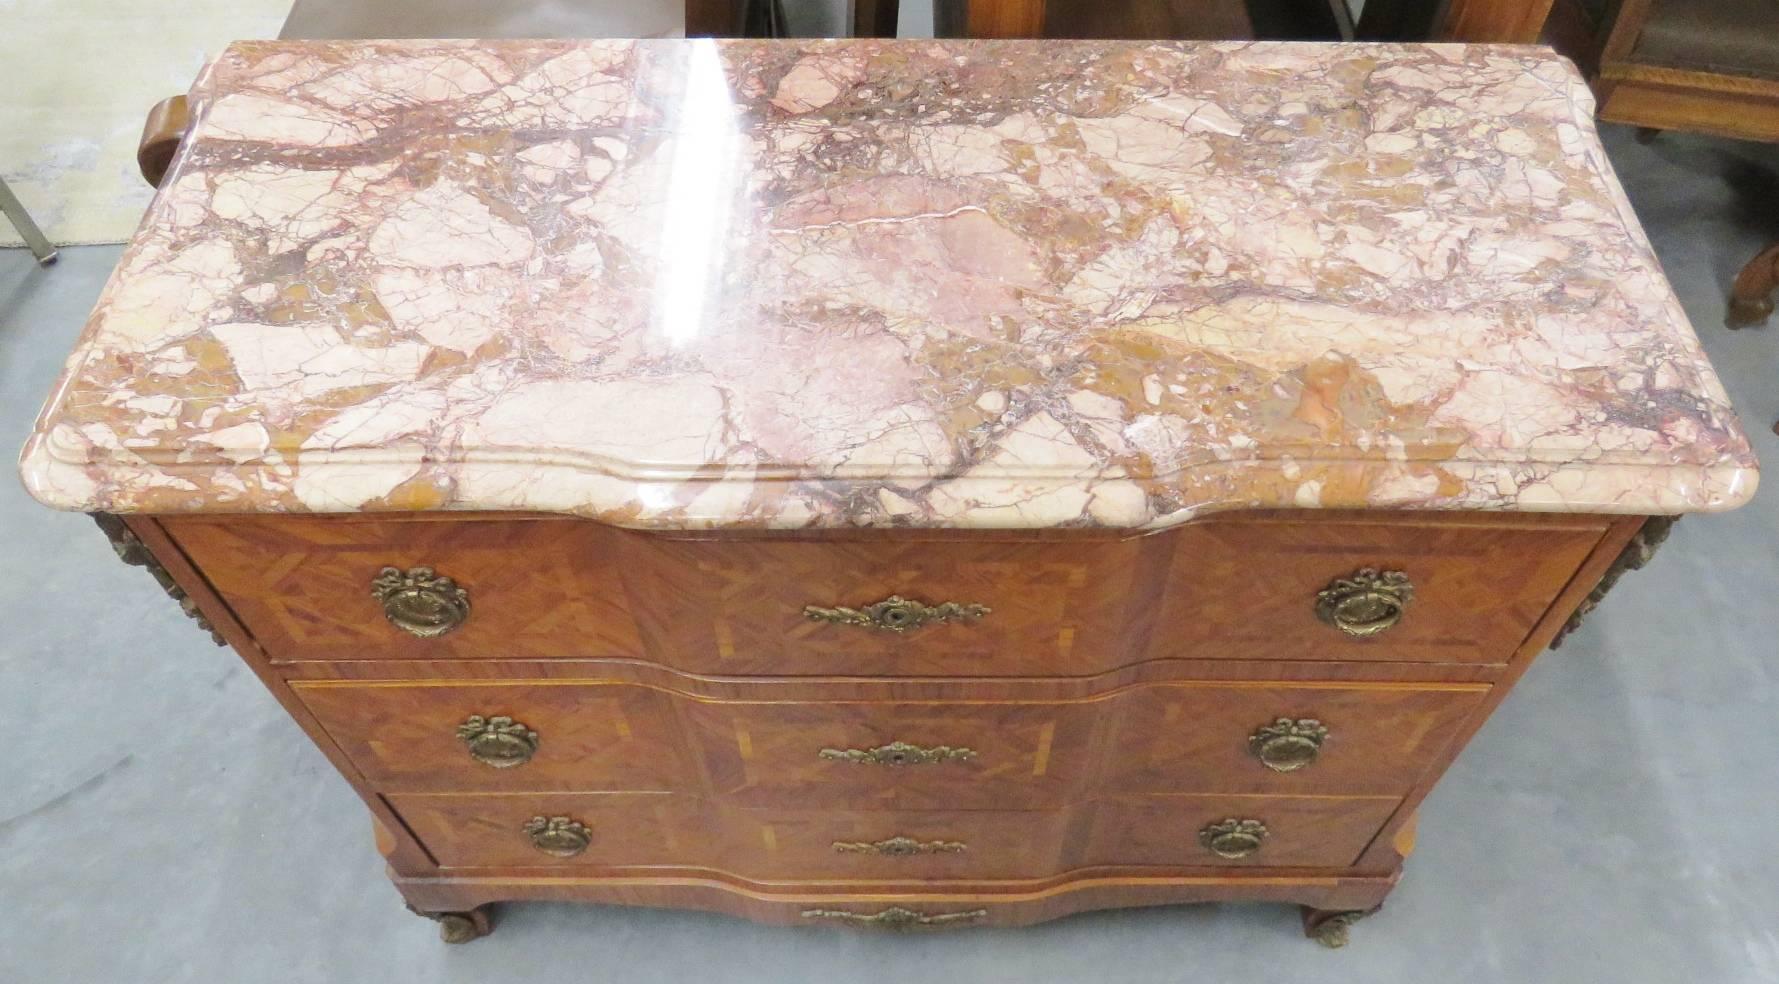 20th Century Louis XV Style Bronze Mounted Parquetry Inlaid Marble-Top Commode